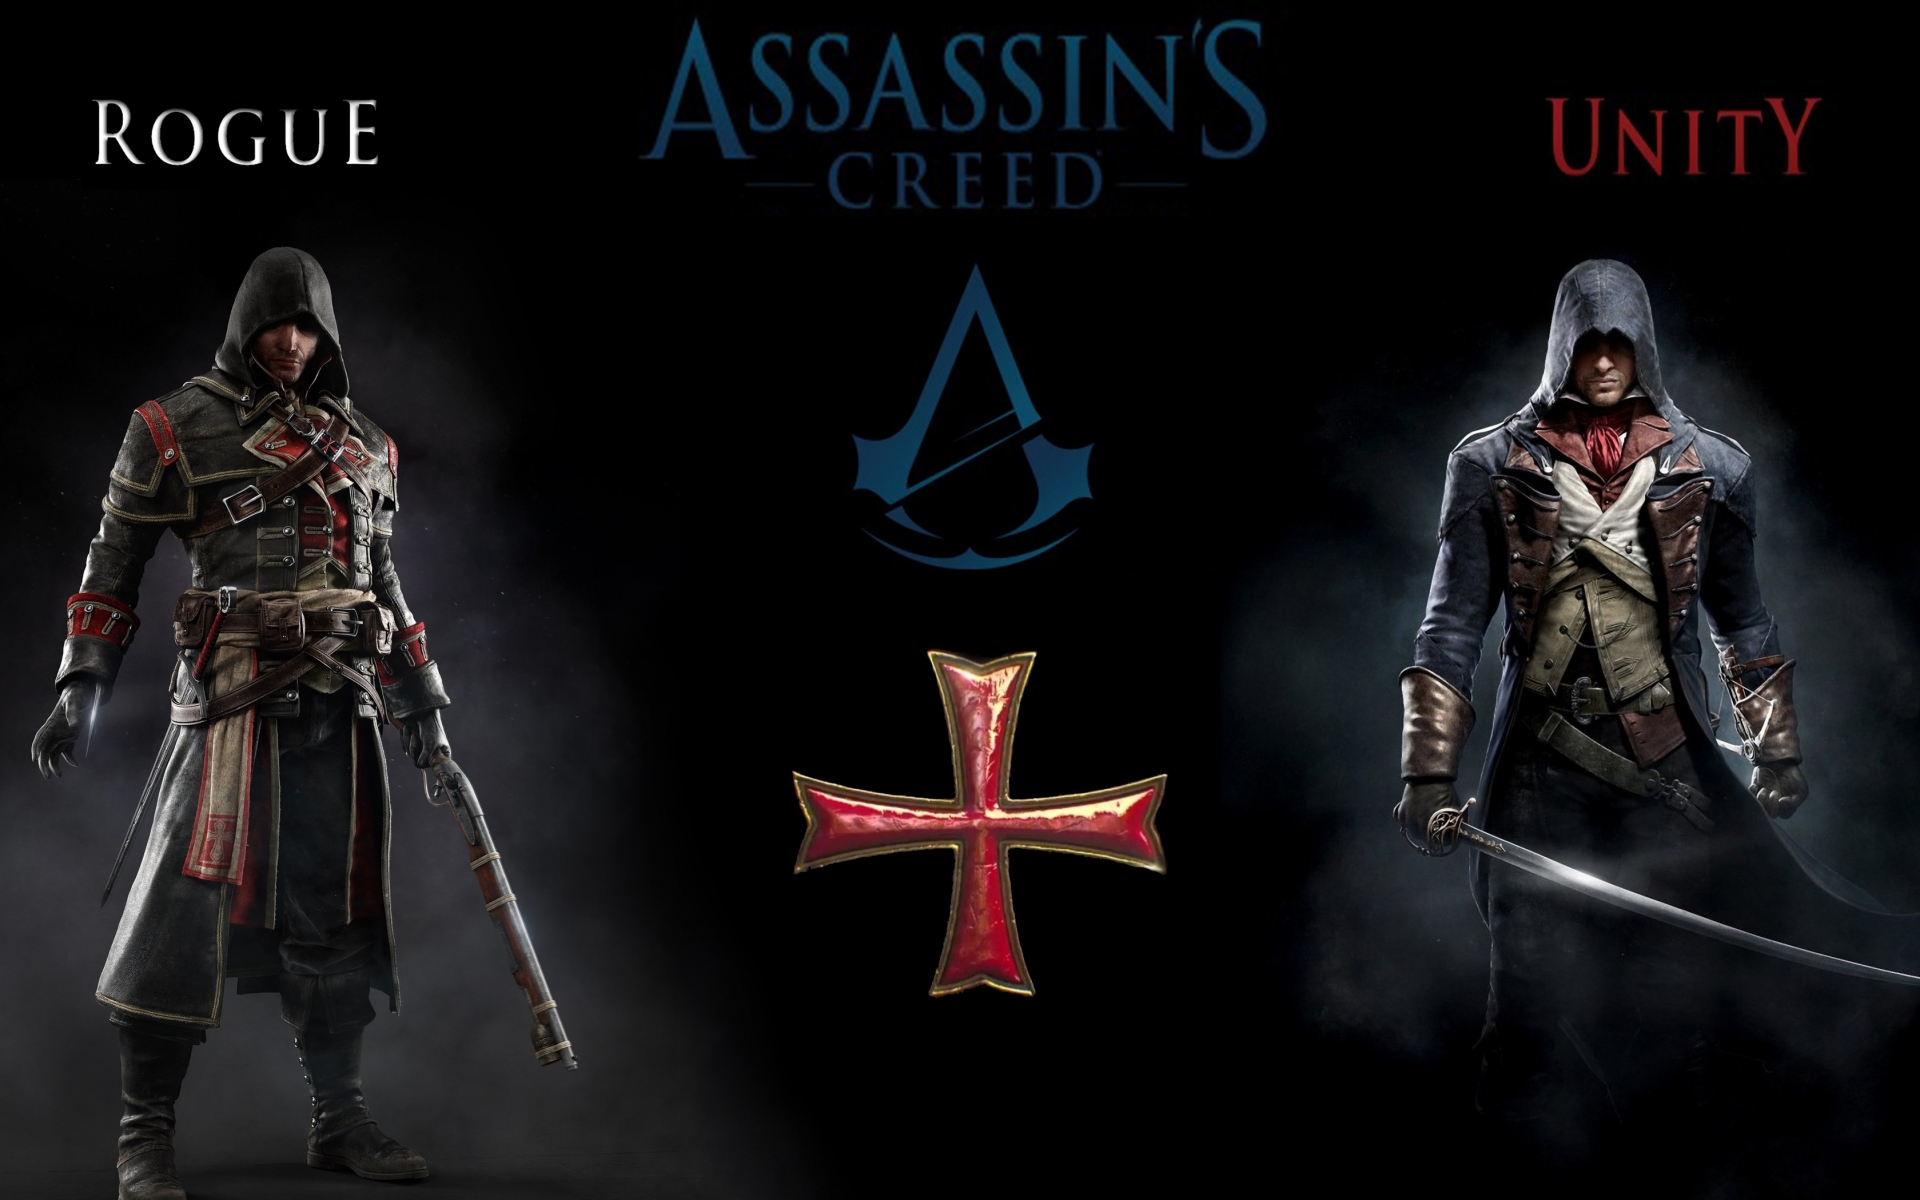 50 Assassins Creed Rogue HD Wallpapers and Backgrounds